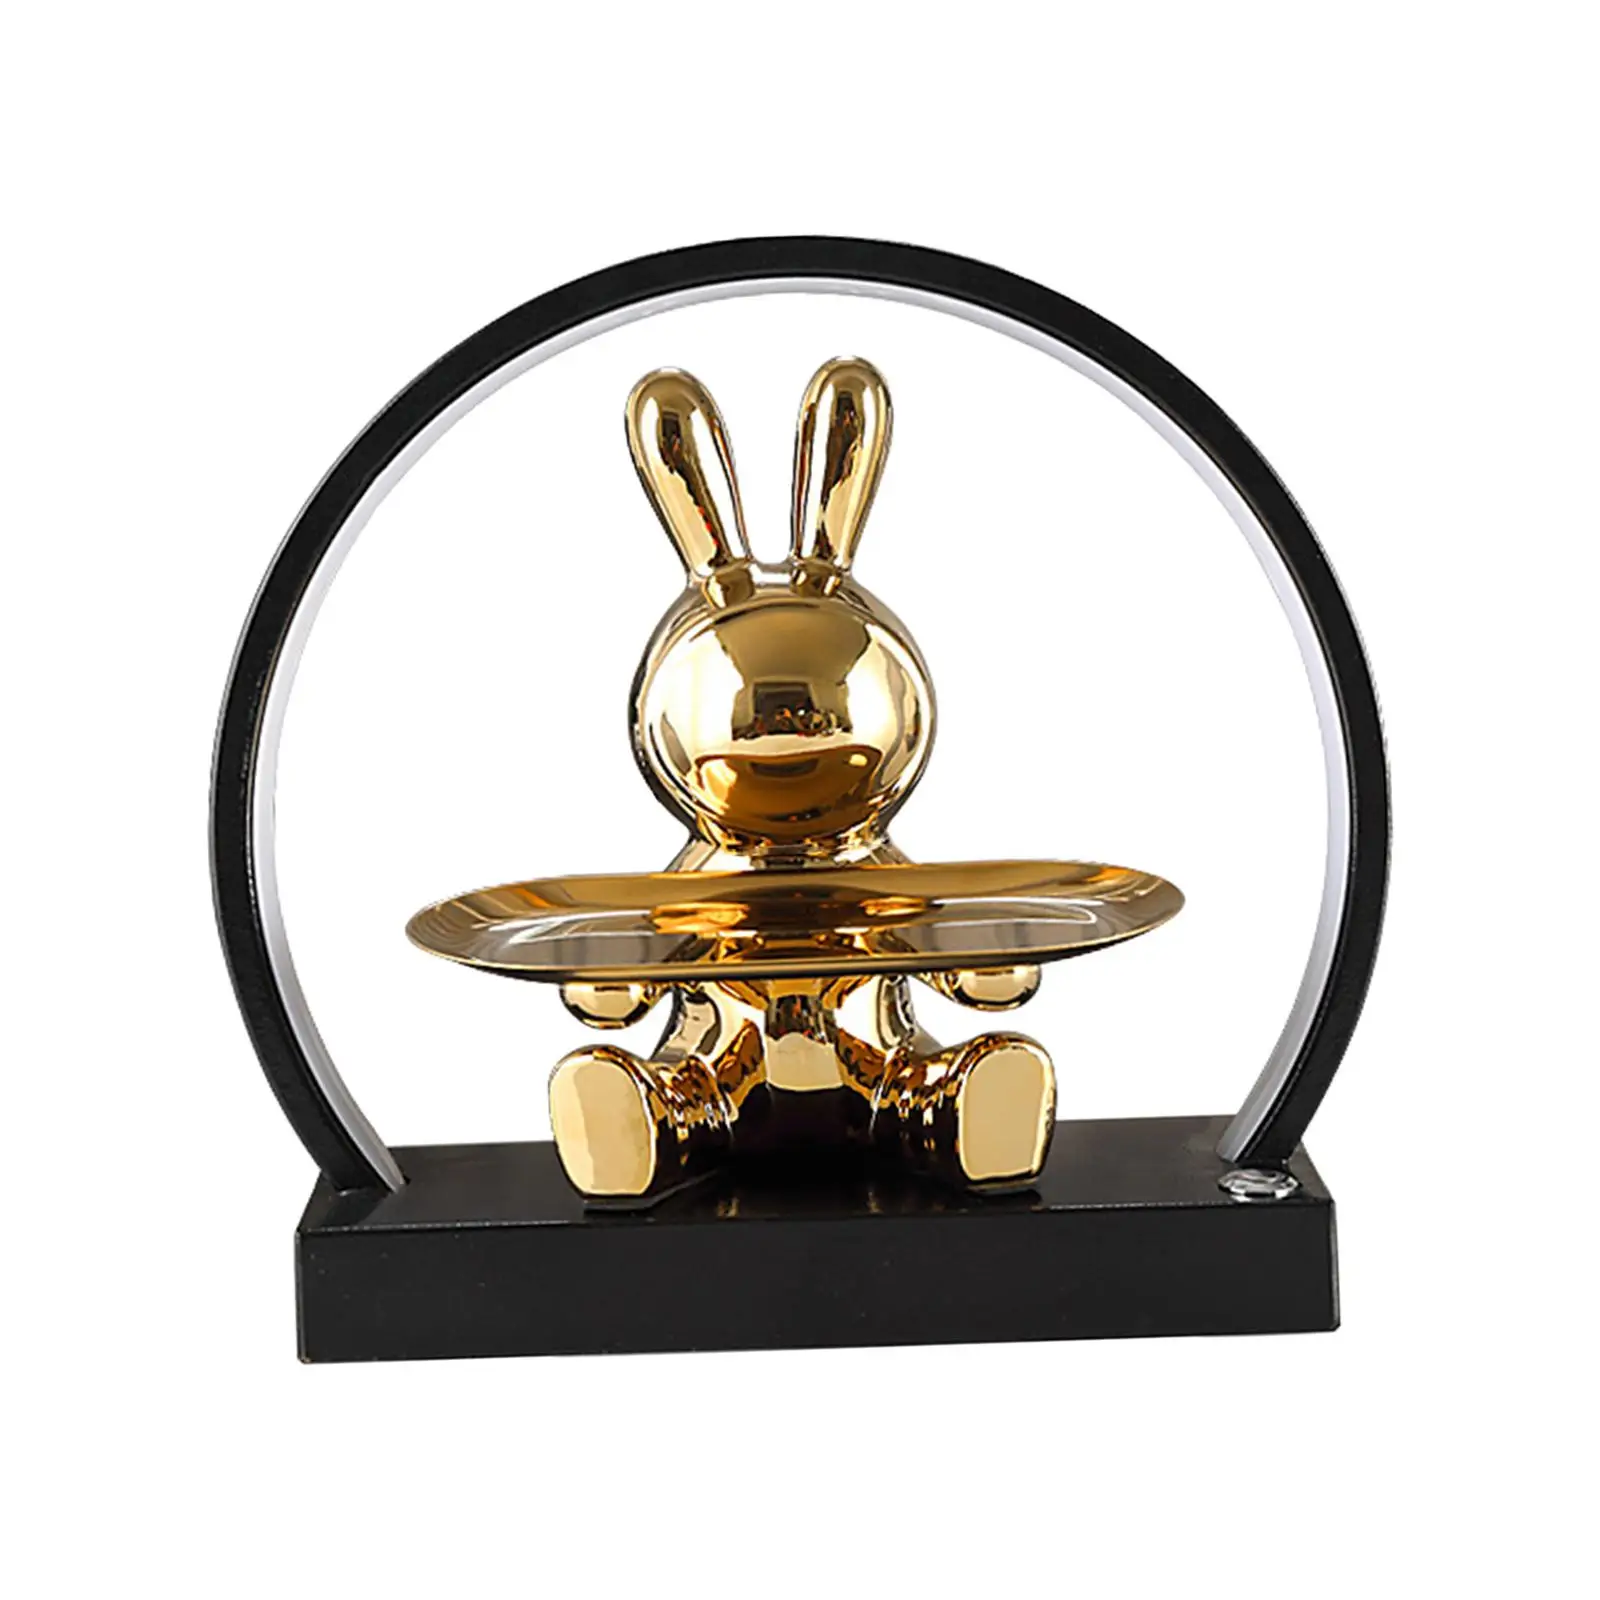 Rabbit Figurine Ceramic Sculpture Jewelry Earrings Tray Bunny Figurine Statue Table Organizer Home Decorations for Restaurant